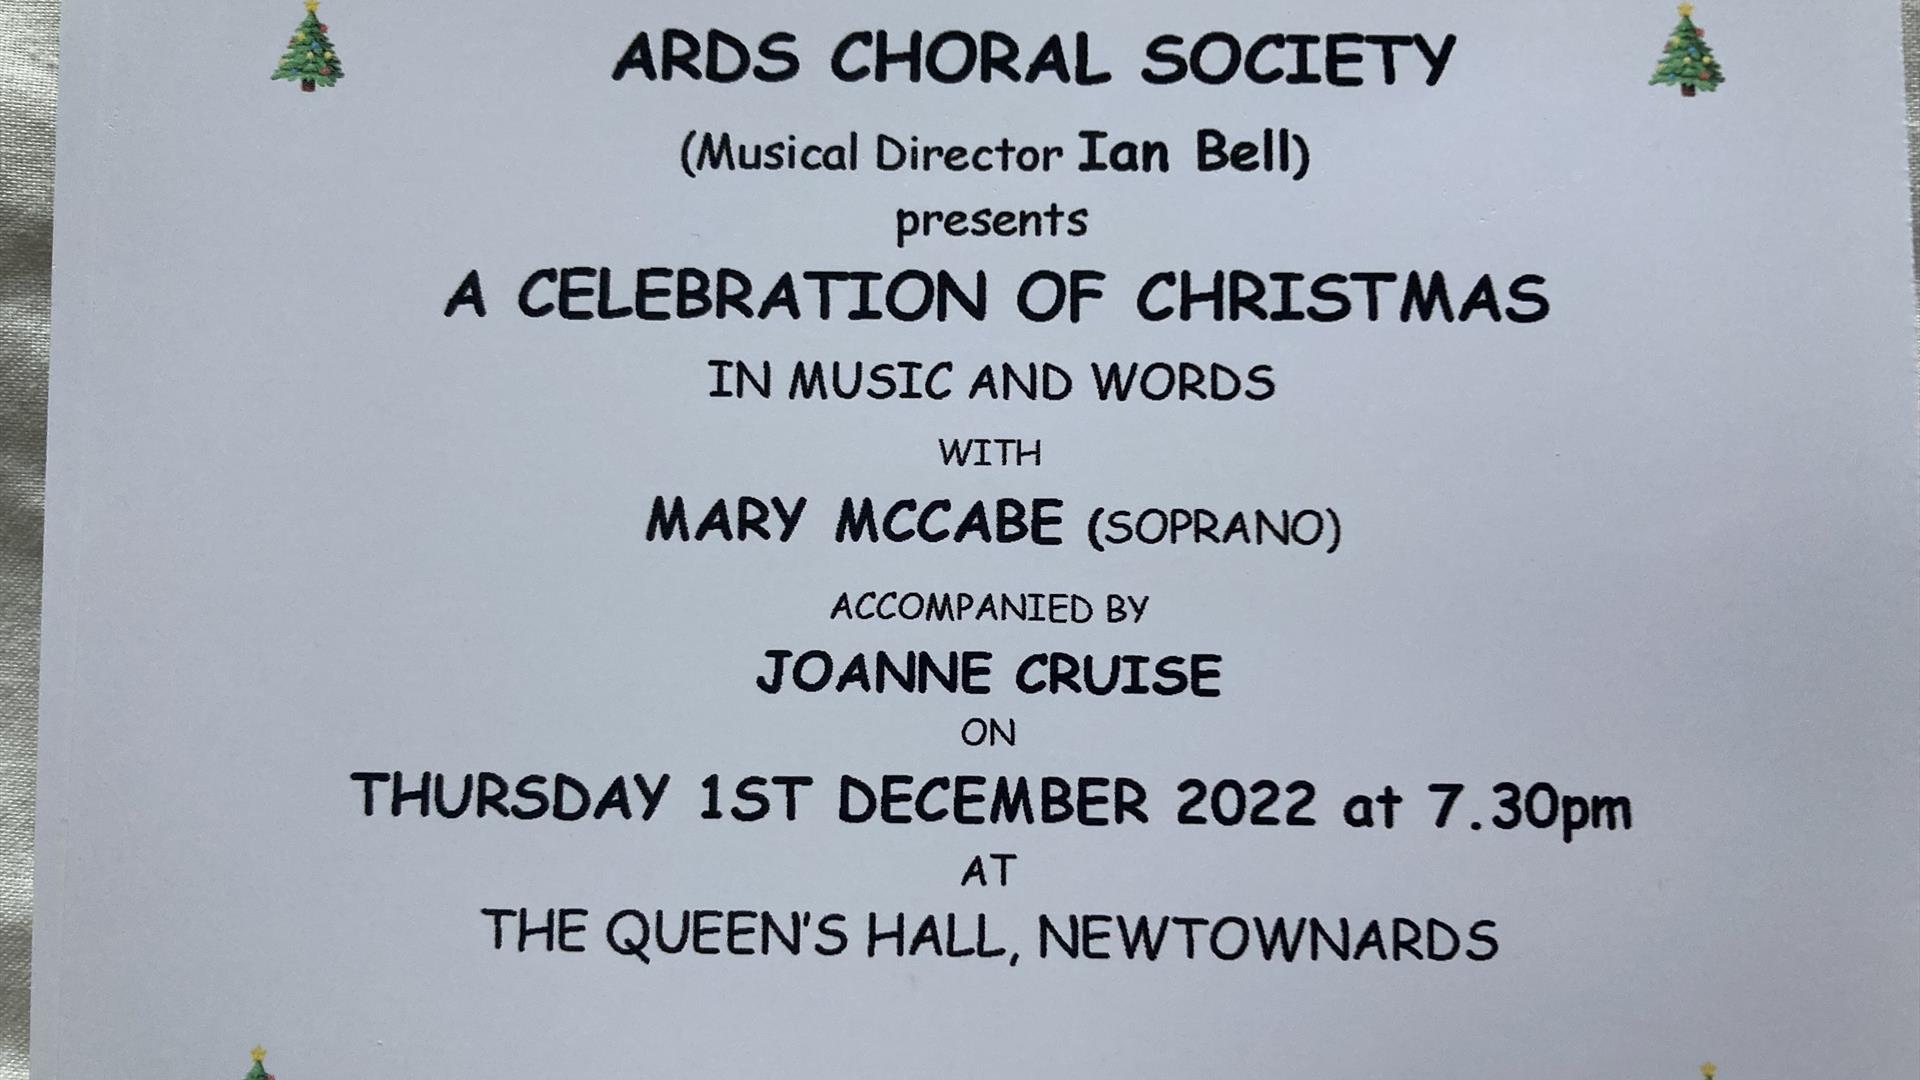 Ards Choral, A Celebration of Christmas event advert